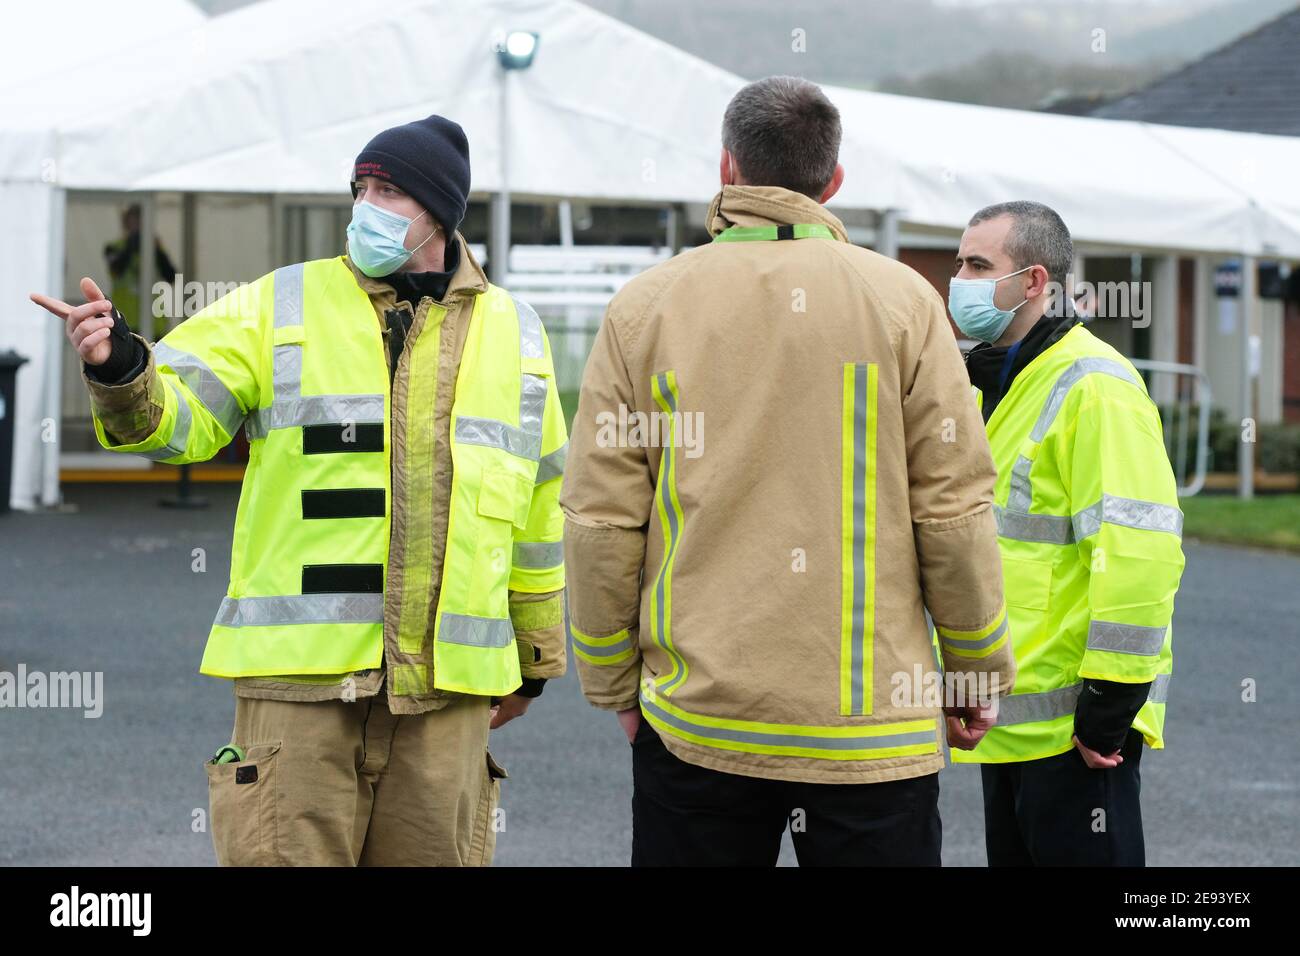 Ludlow, Shropshire, UK - Tuesday 2nd February 2021 - Members of the Shropshire Fire and Rescue service help to staff and organise a new Covid 19 vaccination centre at Ludlow racecourse. This new centre will provide coverage for the Shropshire, Telford & Wrekin area. Photo Steven May / Alamy Live News Stock Photo